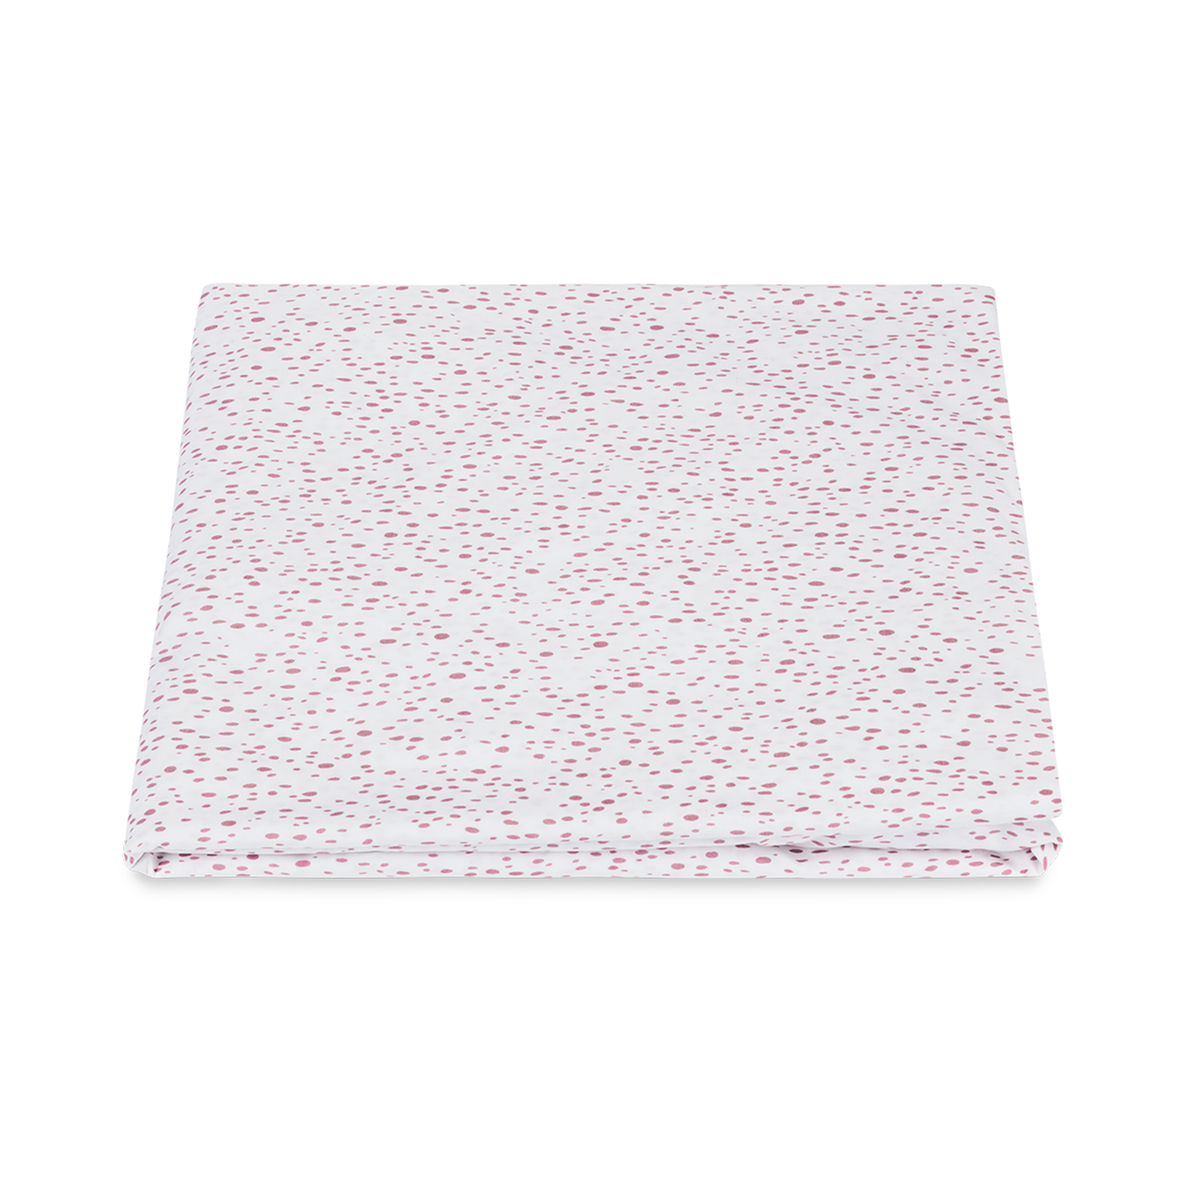 Folded Fitted Sheet of Matouk Celine Bedding in Pink Color